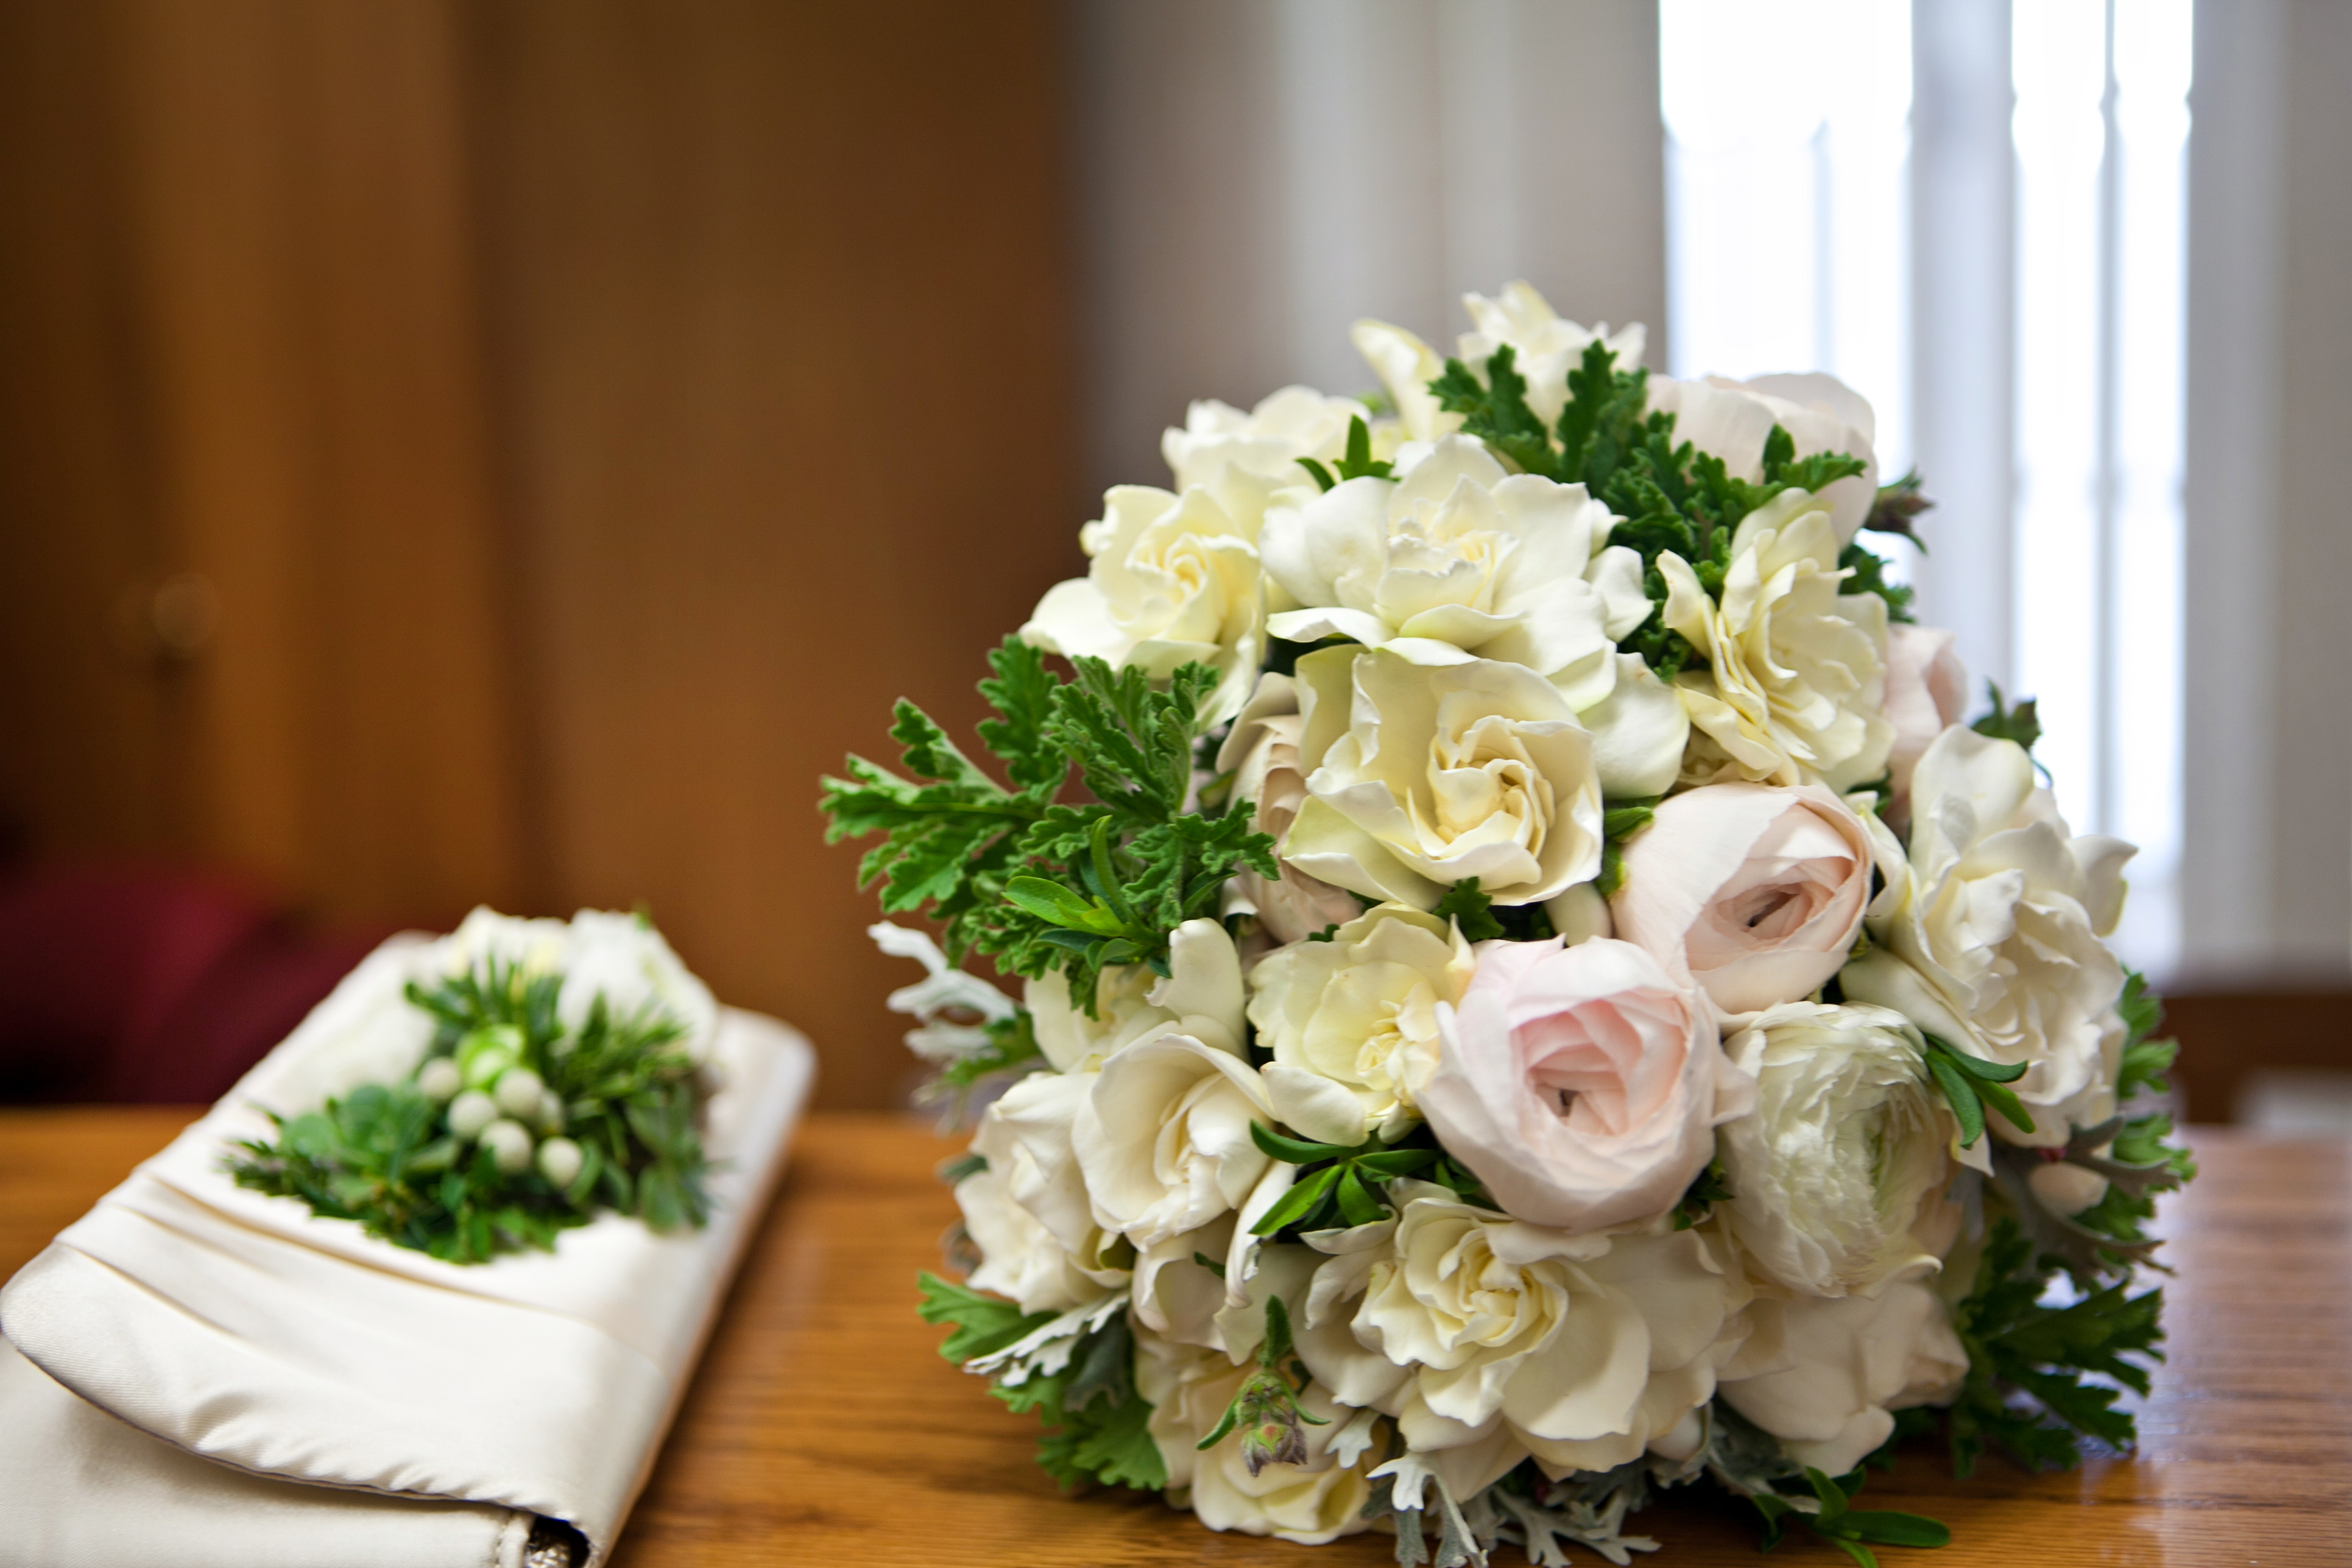 Cream and Pale Pink Bouquet With Waxy Greenery